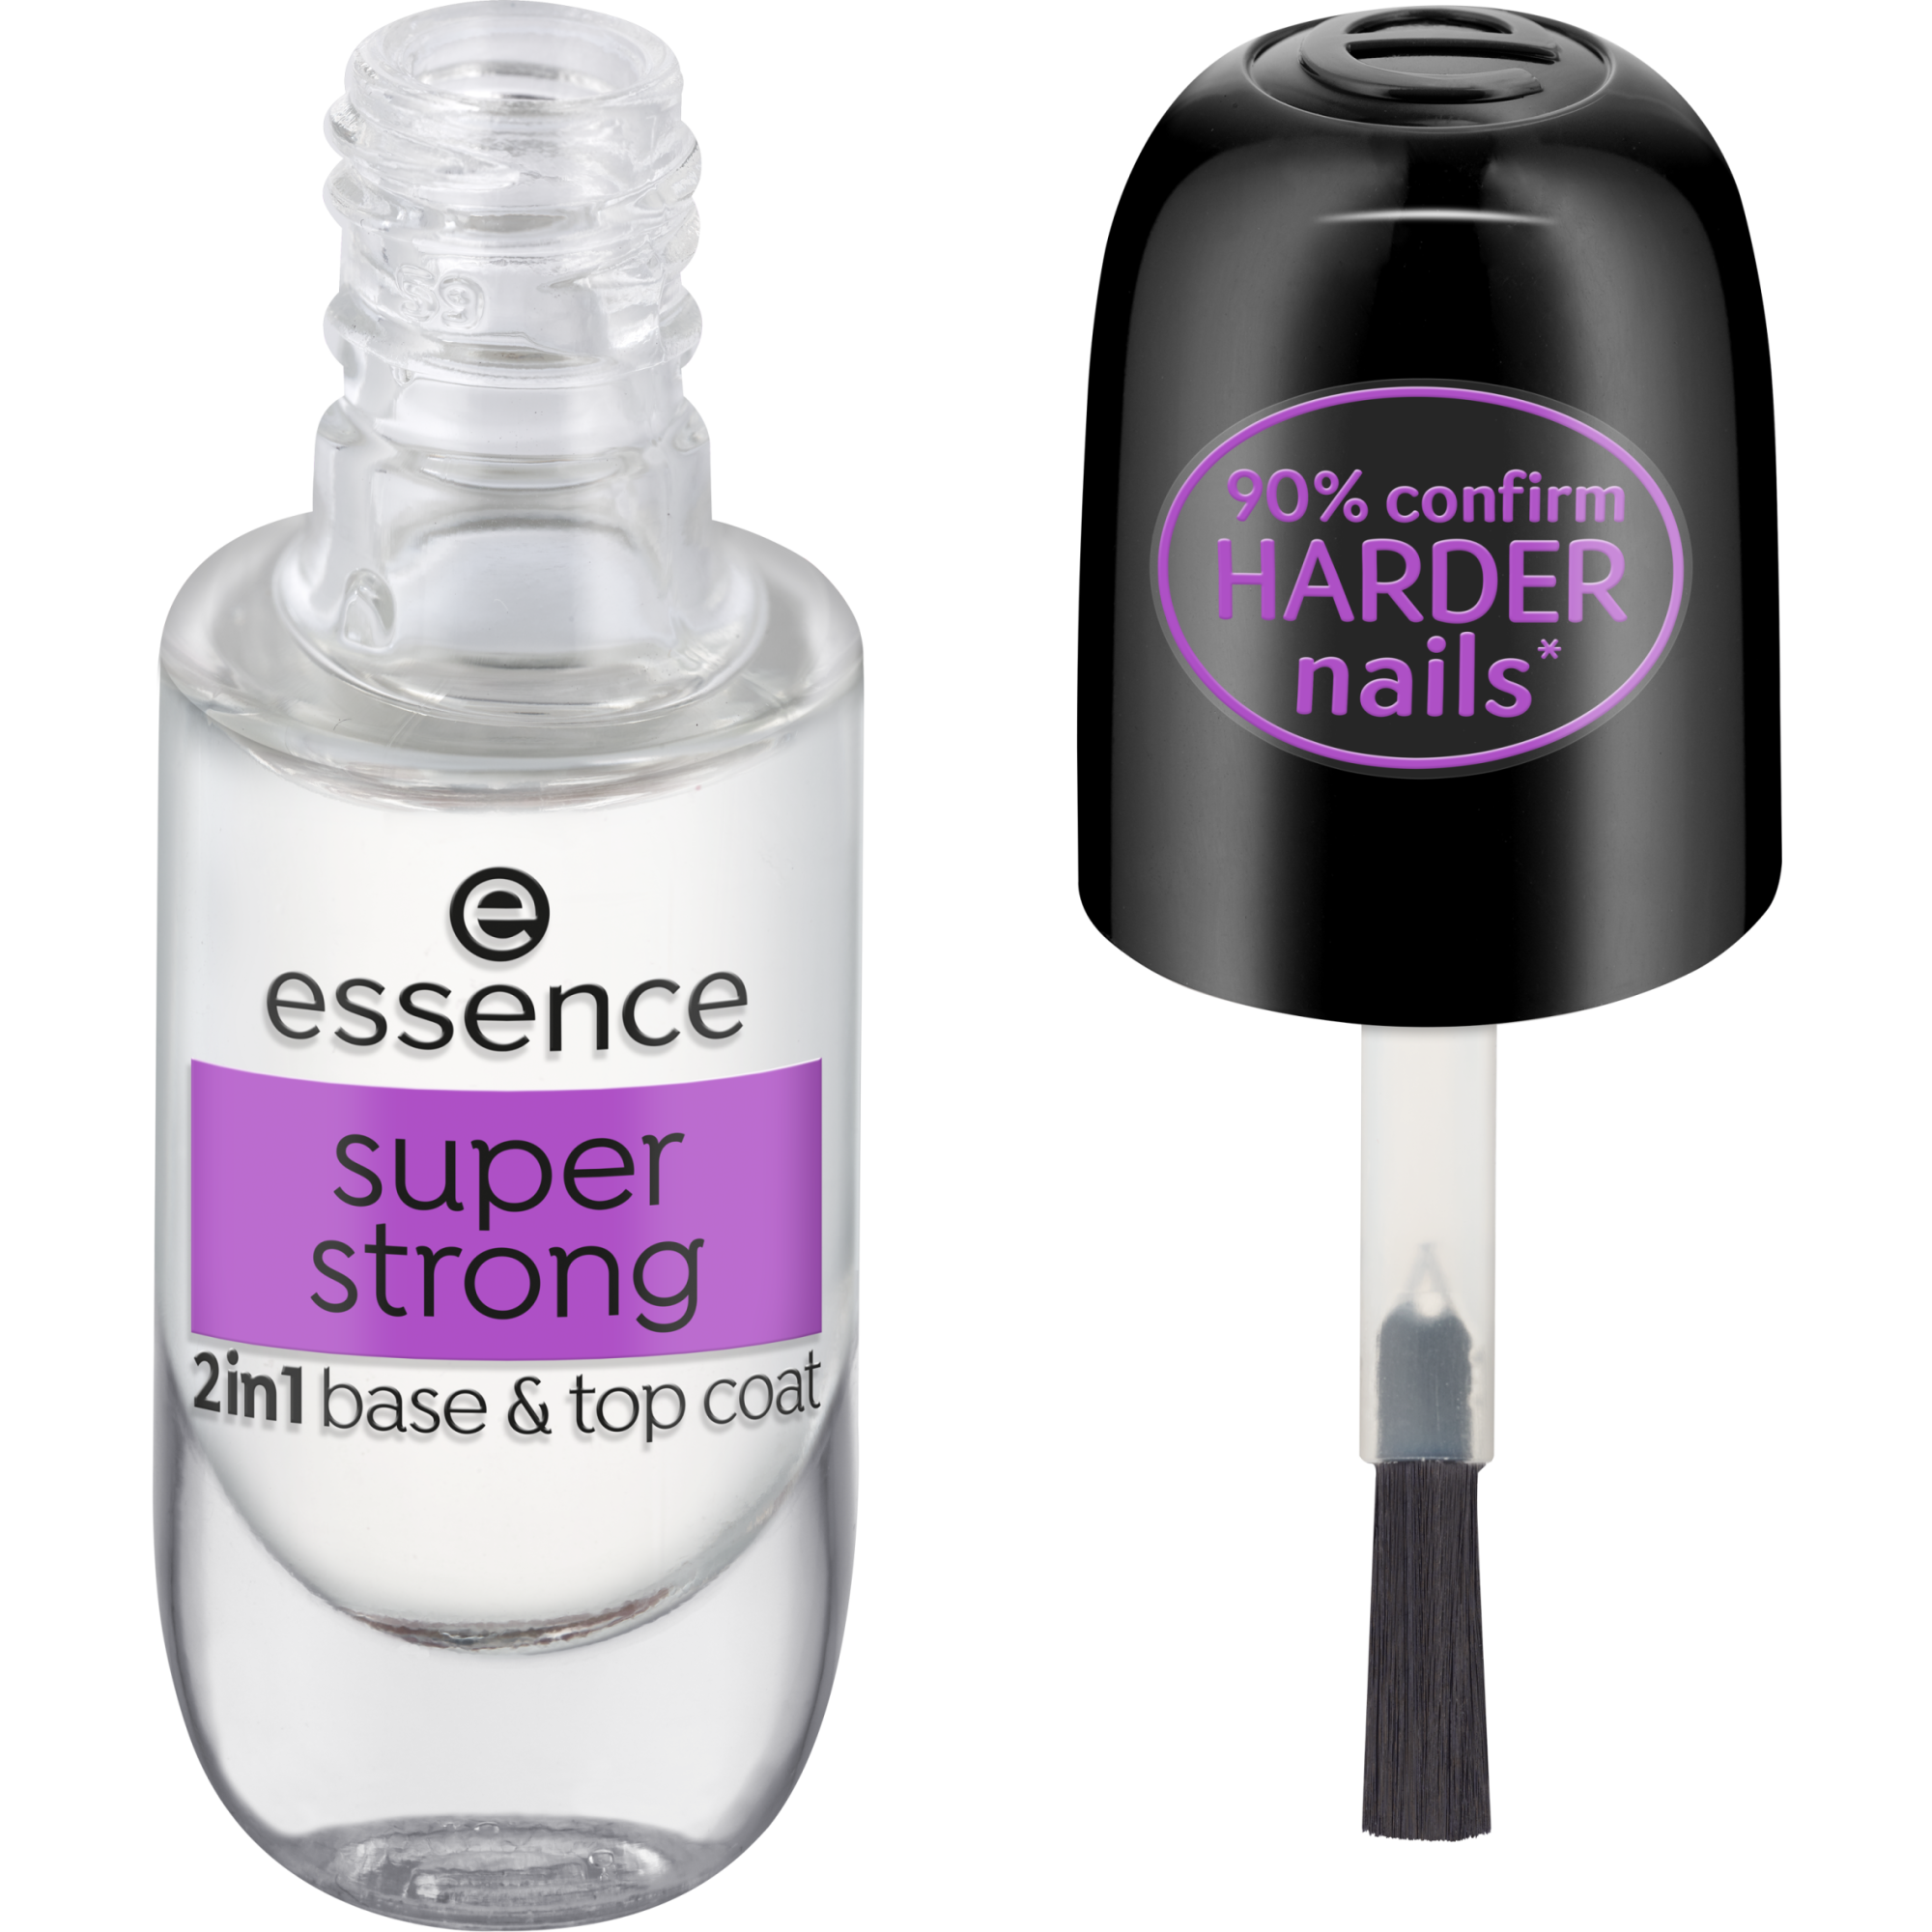 super strong 2in1 base & top coat